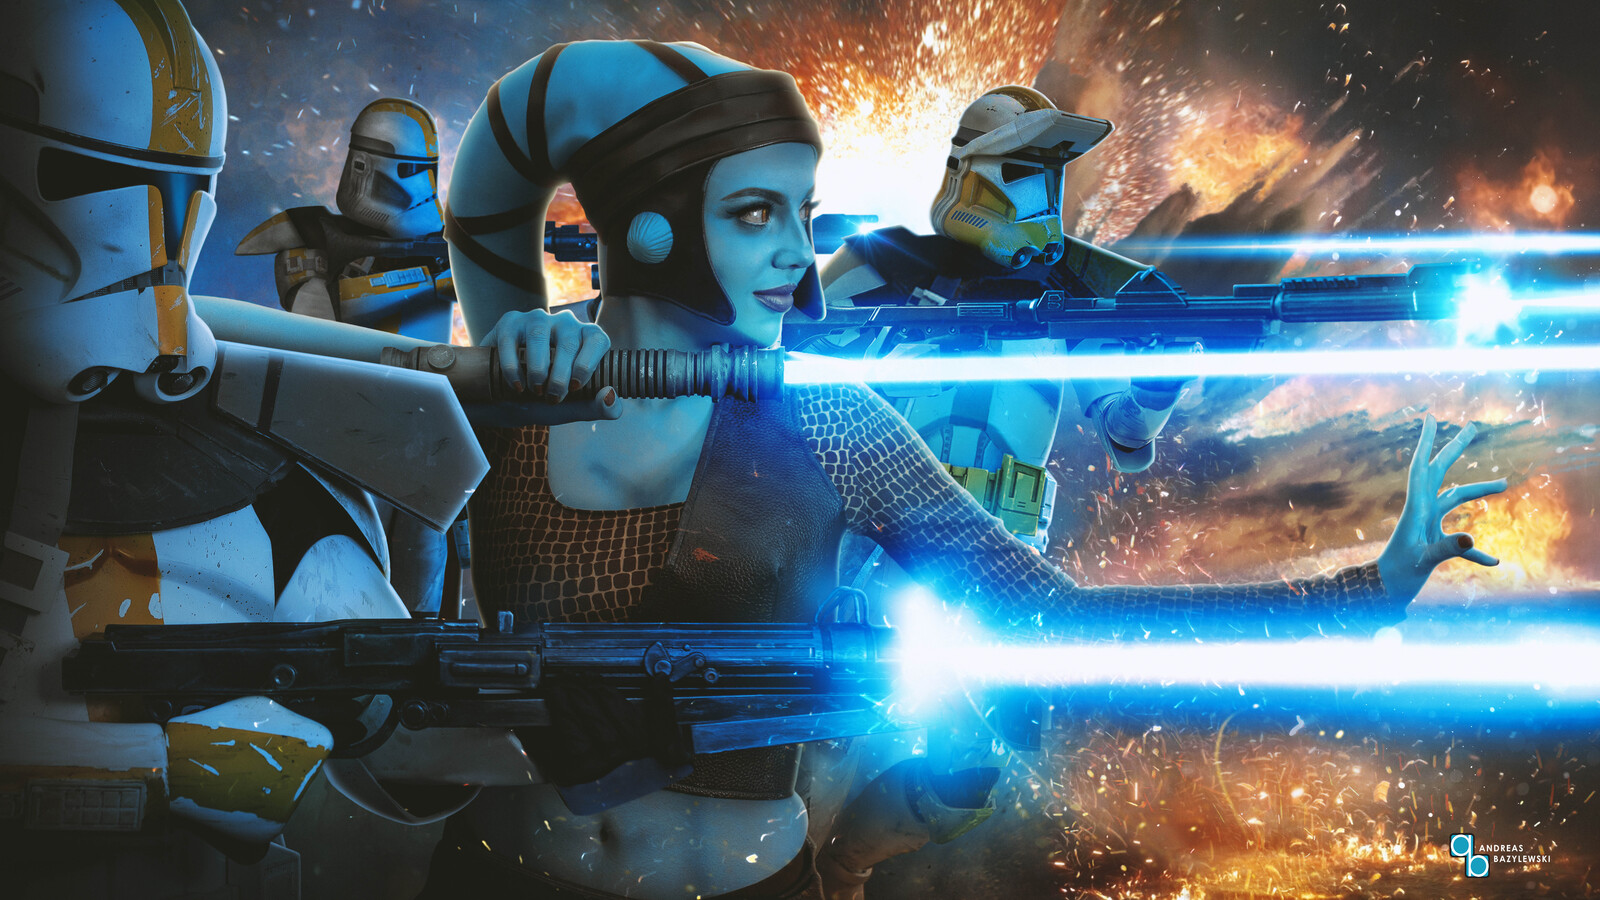 Star Wars The Clone Wars: Aayla Secura and the 327th Star Corps